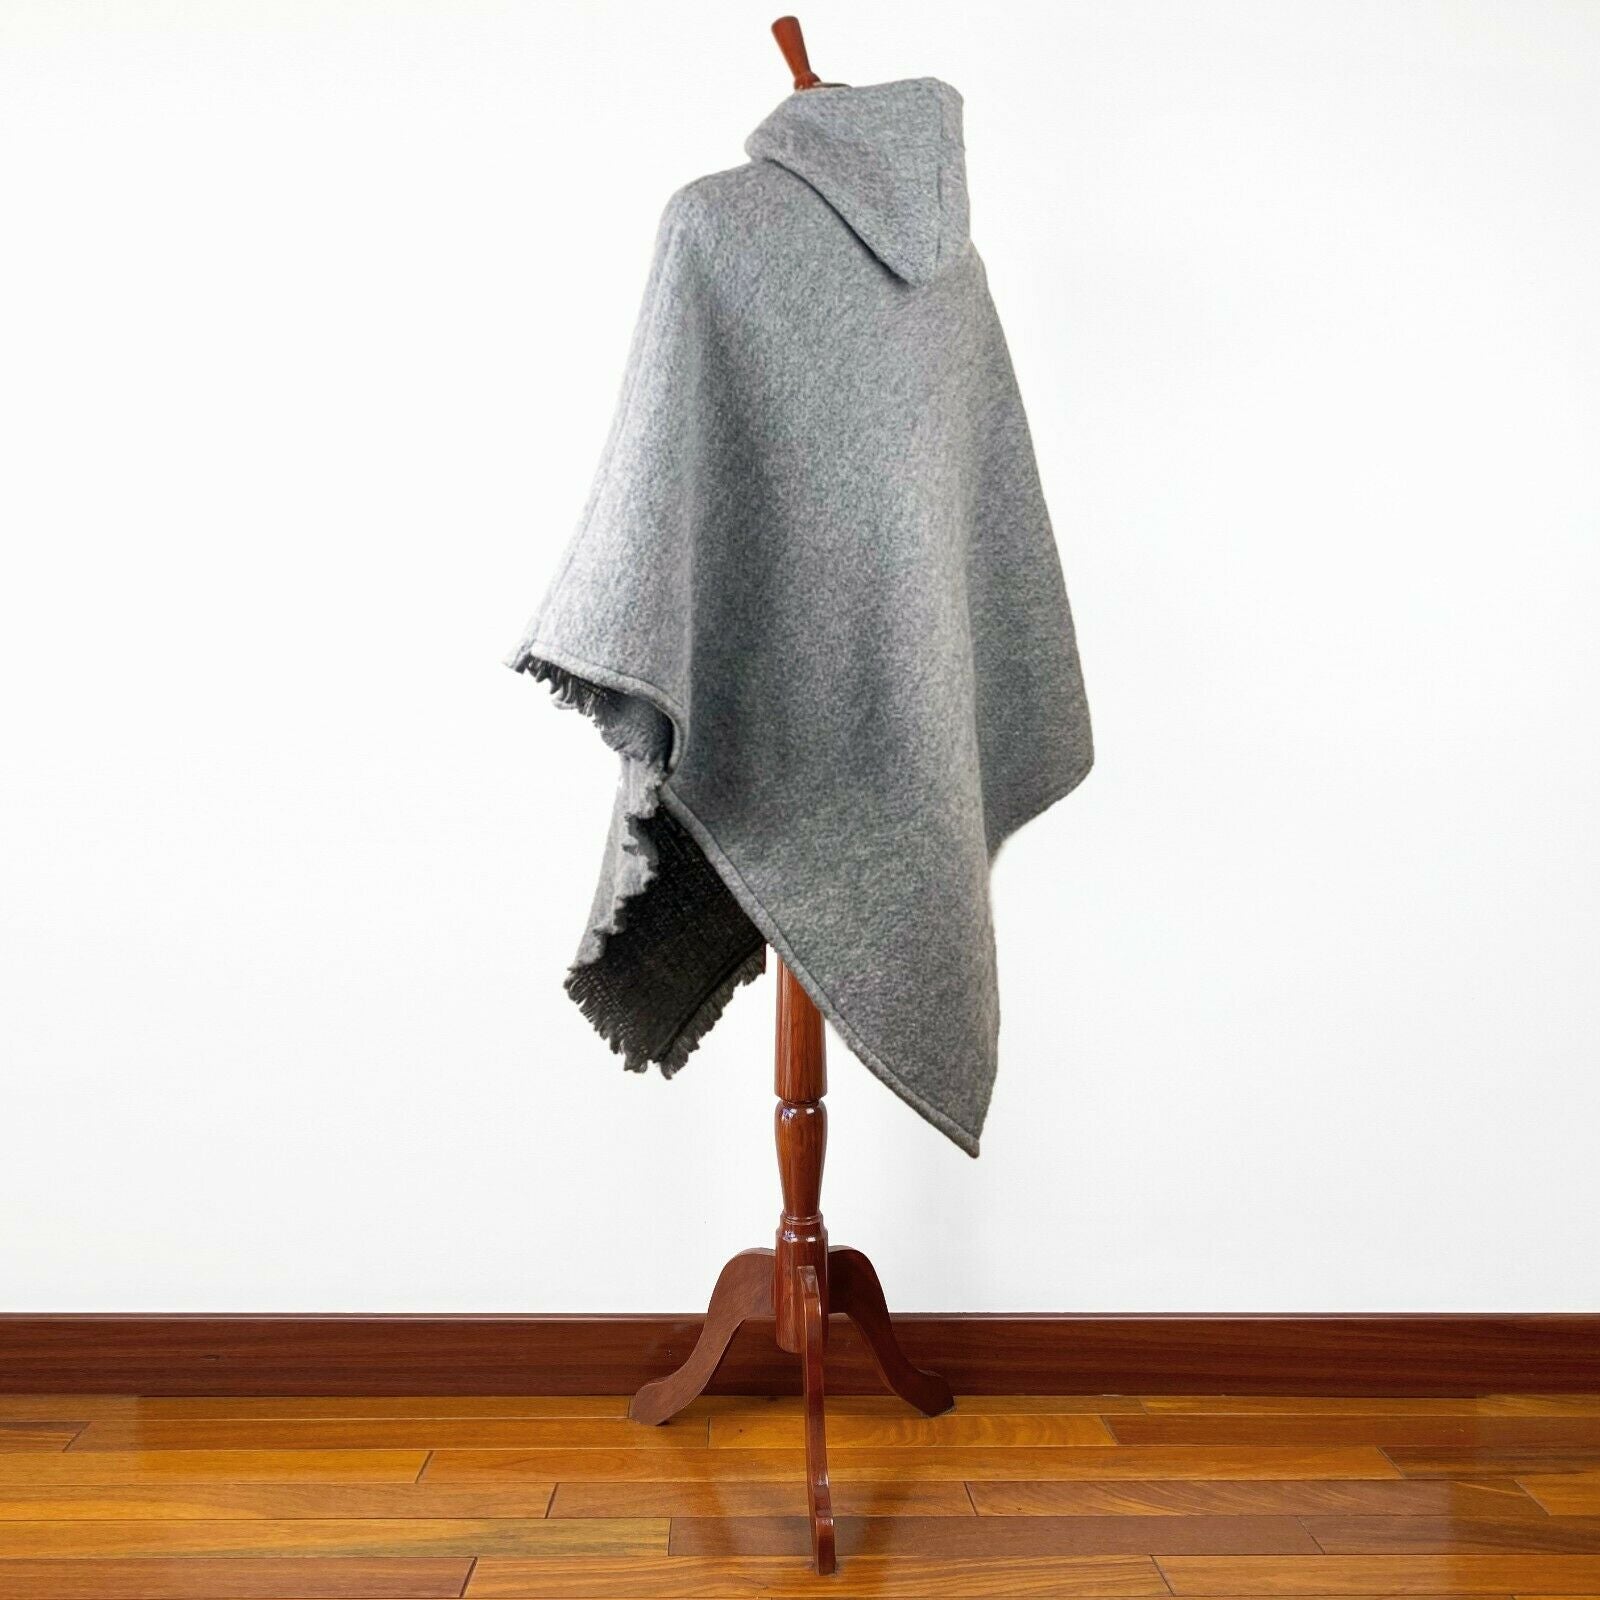 Extra Large Surfers Poncho with hood and pocket llama wool - GRAY